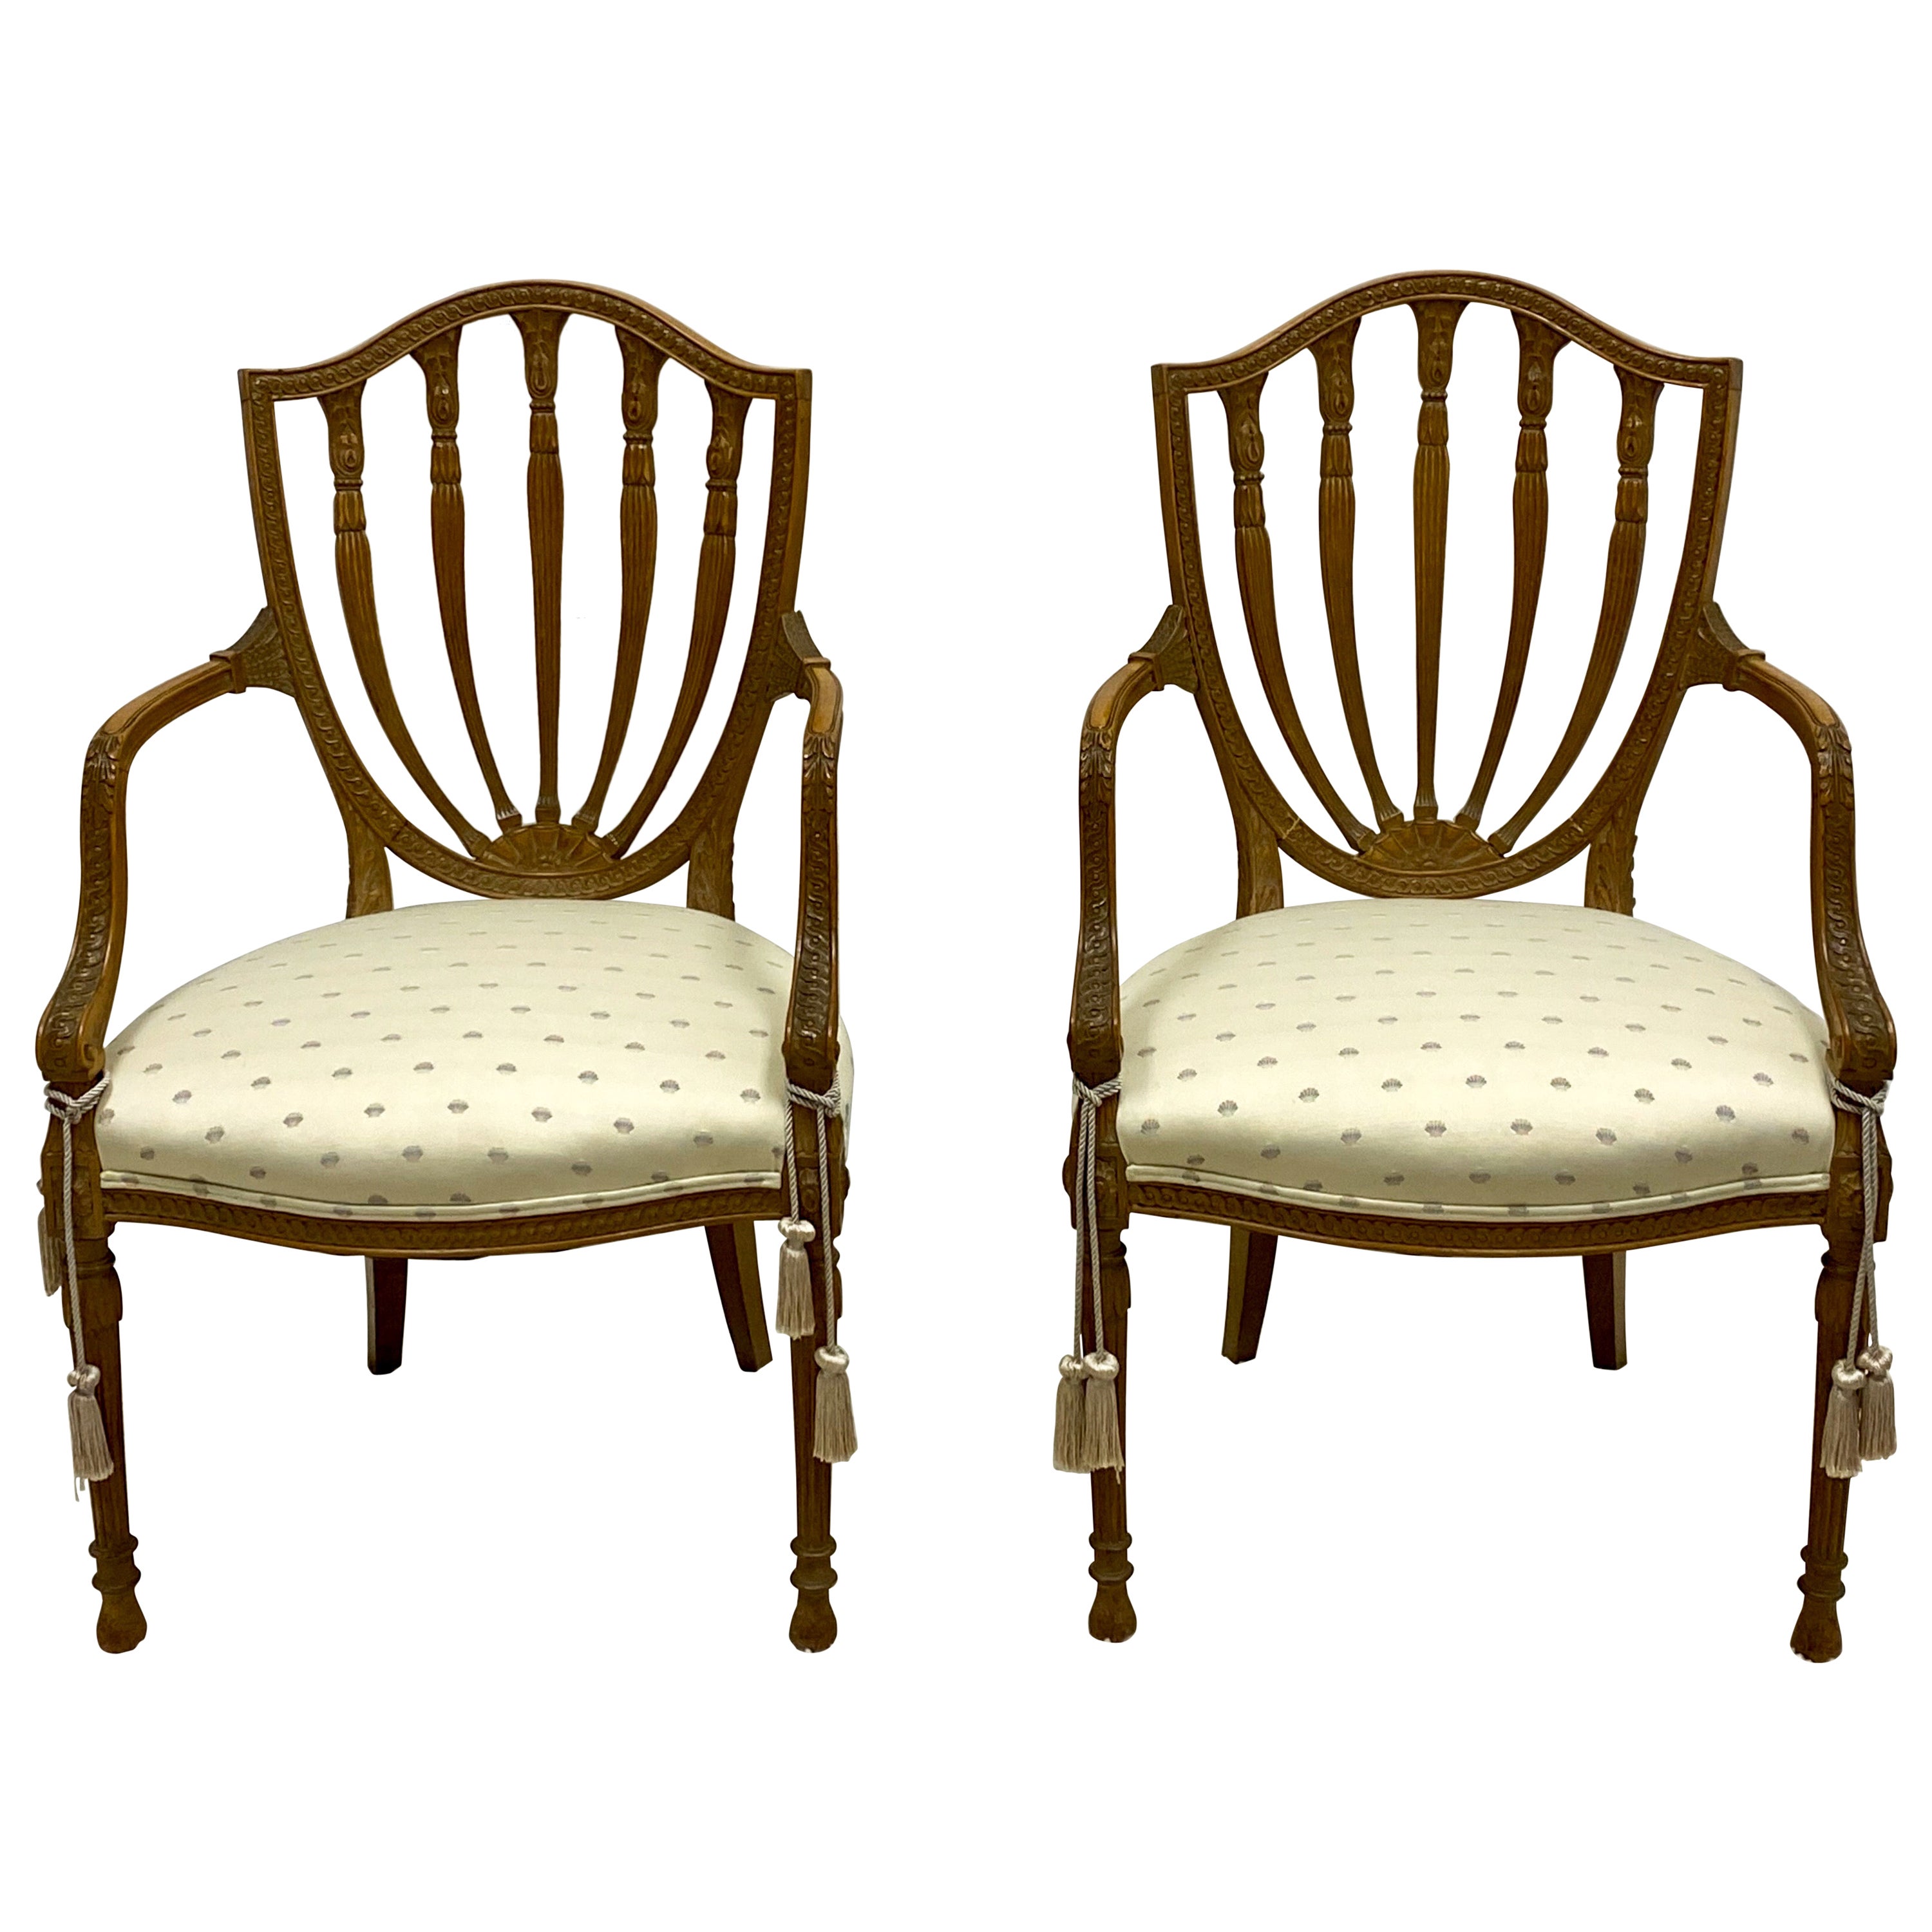 Baker Furniture Carved Fruitwood Shieldback Adam Style Chairs, Pair